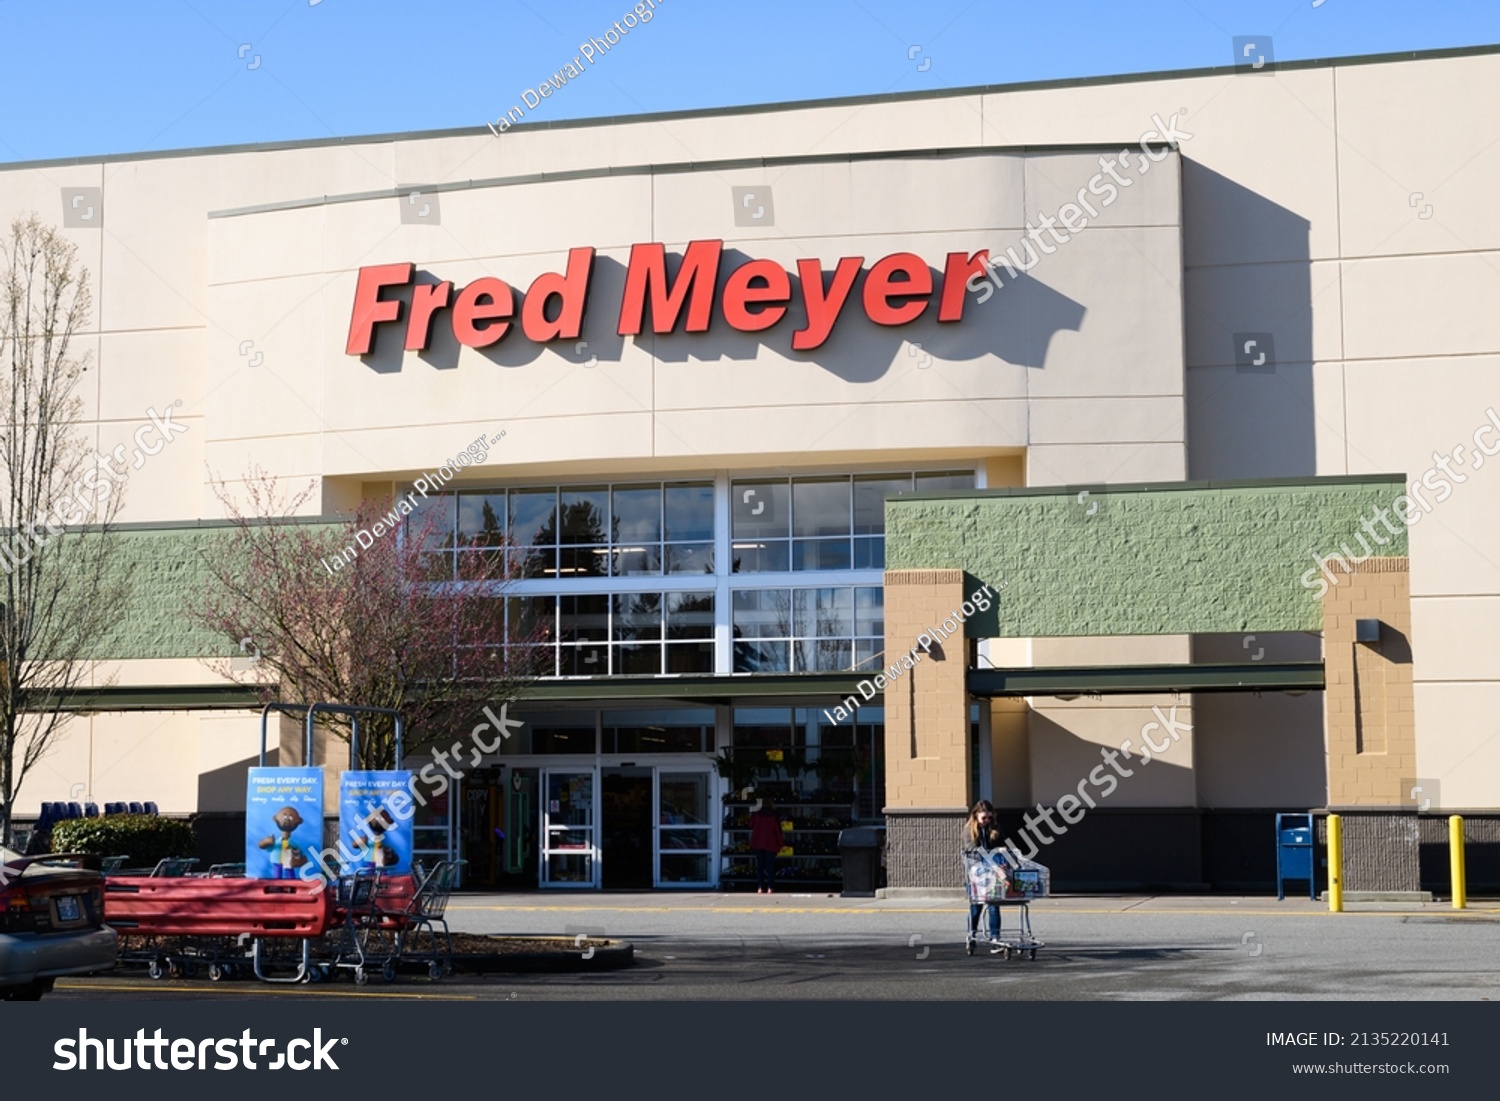 152 Fred meyer Images, Stock Photos & Vectors Shutterstock